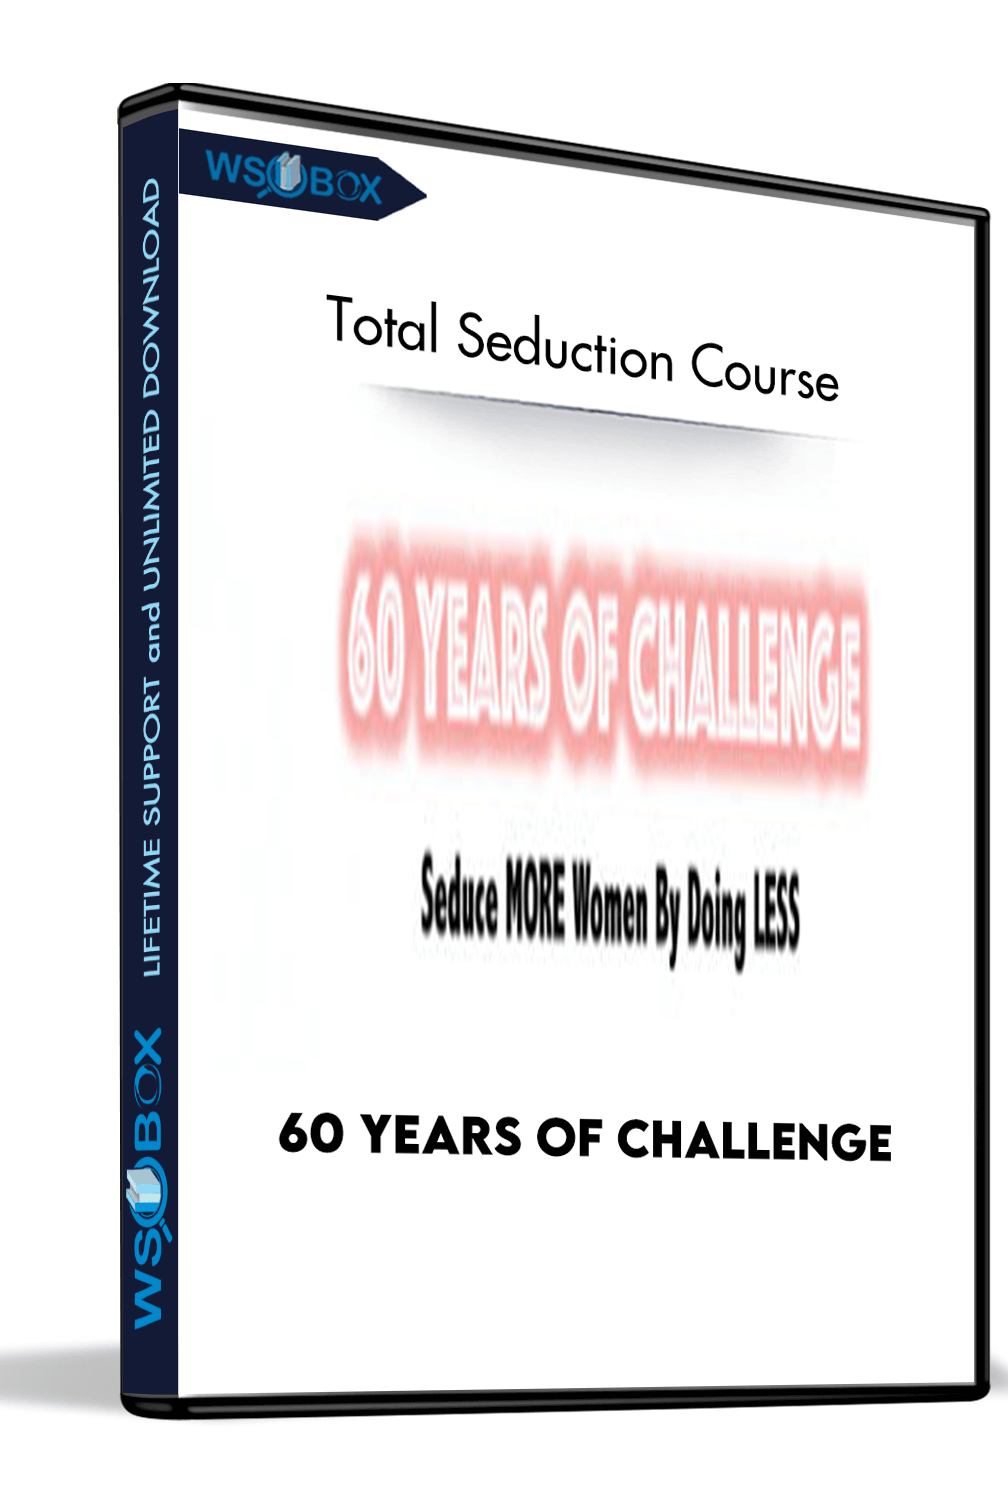 60-years-of-challenge-total-seduction-course